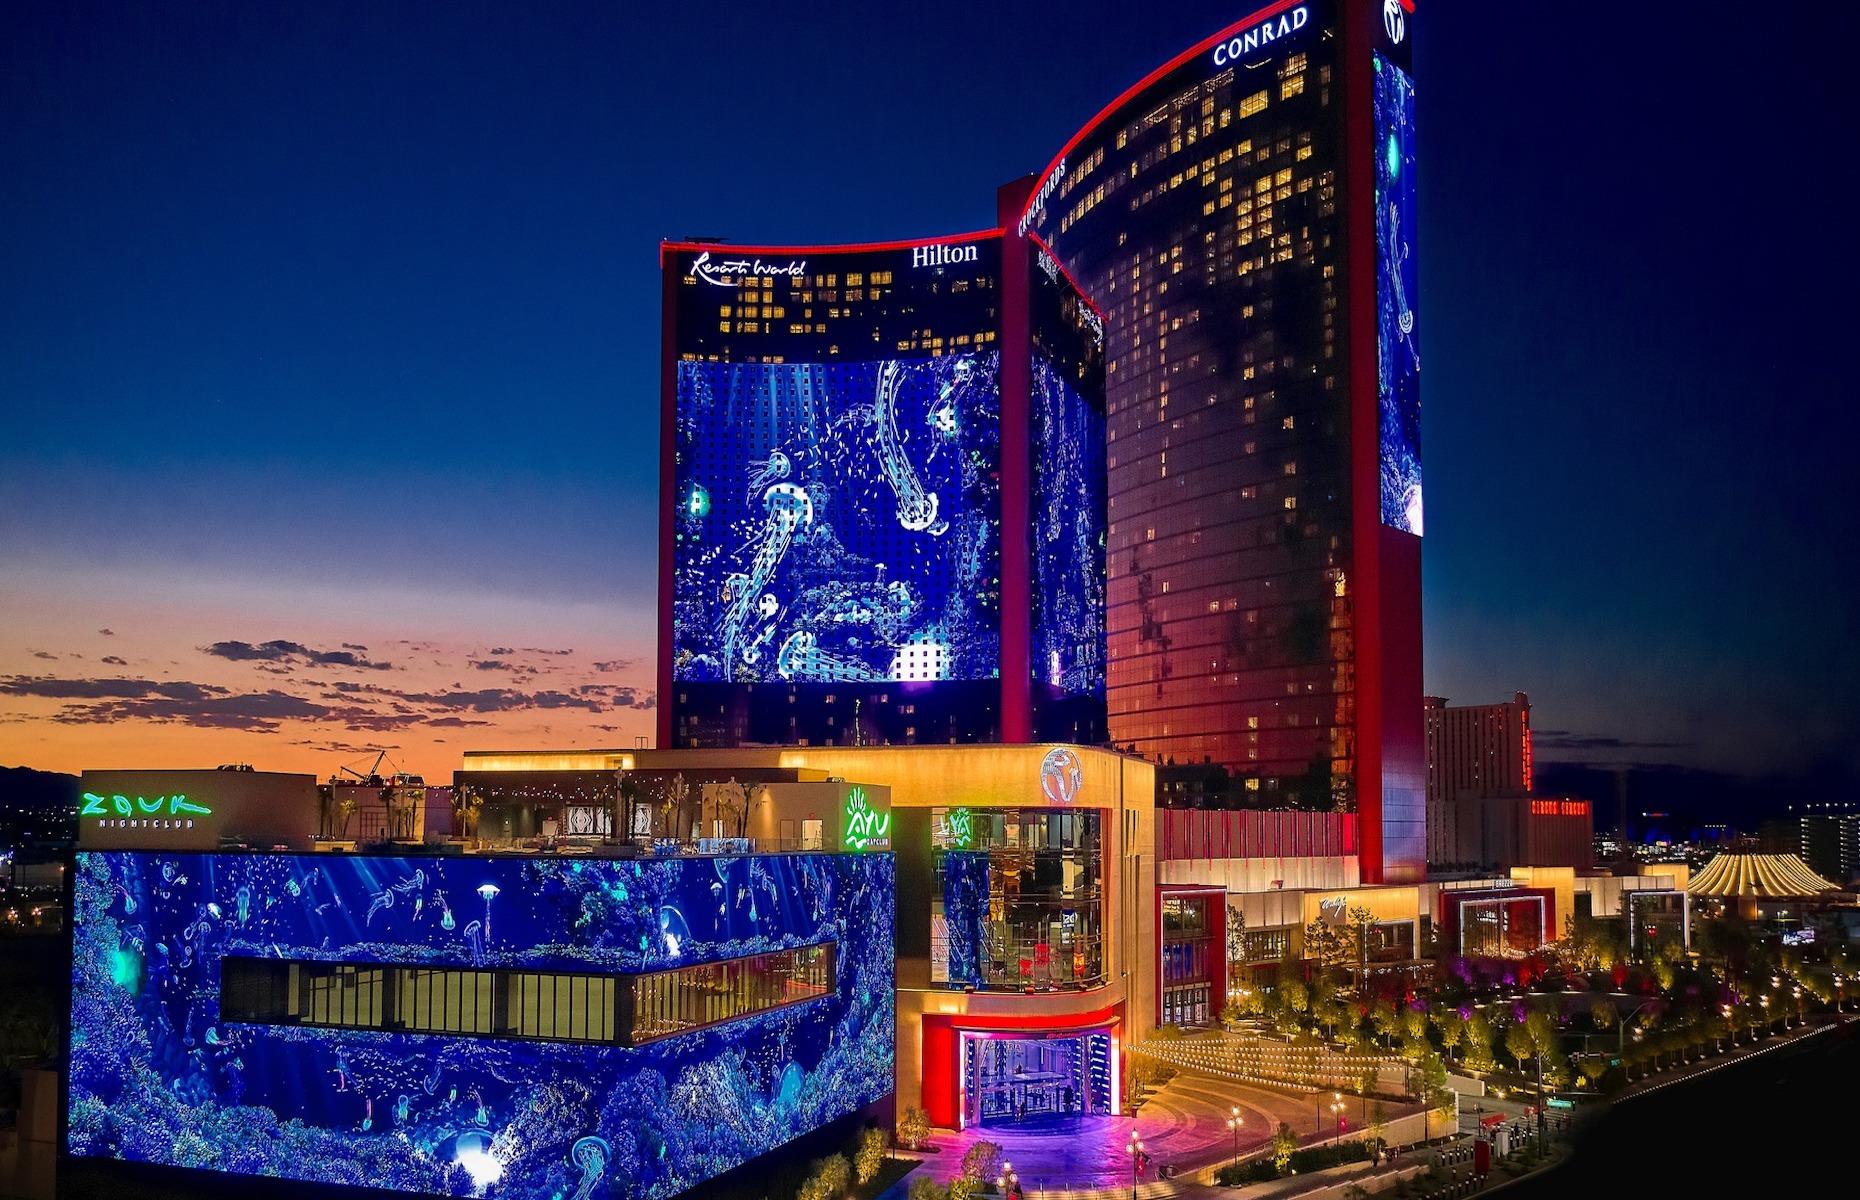 <p>Sin City newcomer Resorts World Las Vegas has 3,506 guest rooms spread across its property that consists of three hotels: Las Vegas Hilton, Conrad Las Vegas and Crockfords Las Vegas. Opening on the north end of Las Vegas Boulevard in June 2021, it was the first integrated resort to be built on the Strip in over a decade.  As well as its 117,000-square-foot (35,662sqm) casino, it has over 40 food and drink venues and a 5,000-capacity theater. Its 5.5-acre pool complex, complete with nine bodies of water, is the largest elevated pool deck in town and has stunning city views.</p>